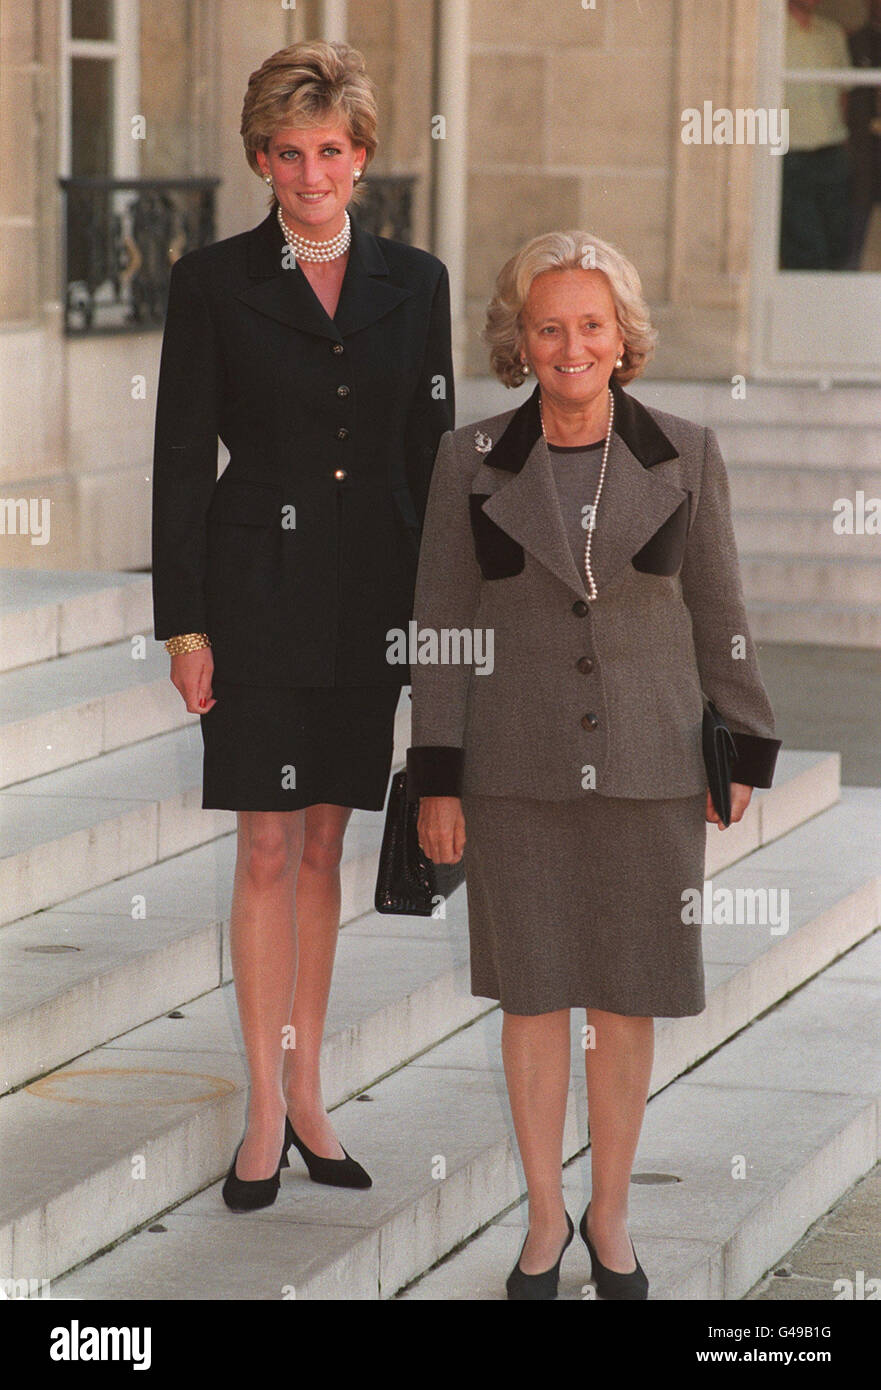 PA NEWS PHOTO 262425-1 : 25/9/95 : THE PRINCESS OF WALES WITH BERNADETTE CHIRAC, WIFE OF FRENCH PRESIDENT, ON THE STEPS OF THE ELYSEE PALACE IN PARIS. THE PRINCESS IS IN PARIS TO ATTEND A FUND RAISING DINNER WHICH WILL BENEFIT GREAT ORMOND STEET HOSPITAL. PHOTO BY JOHN STILLWELL. Stock Photo